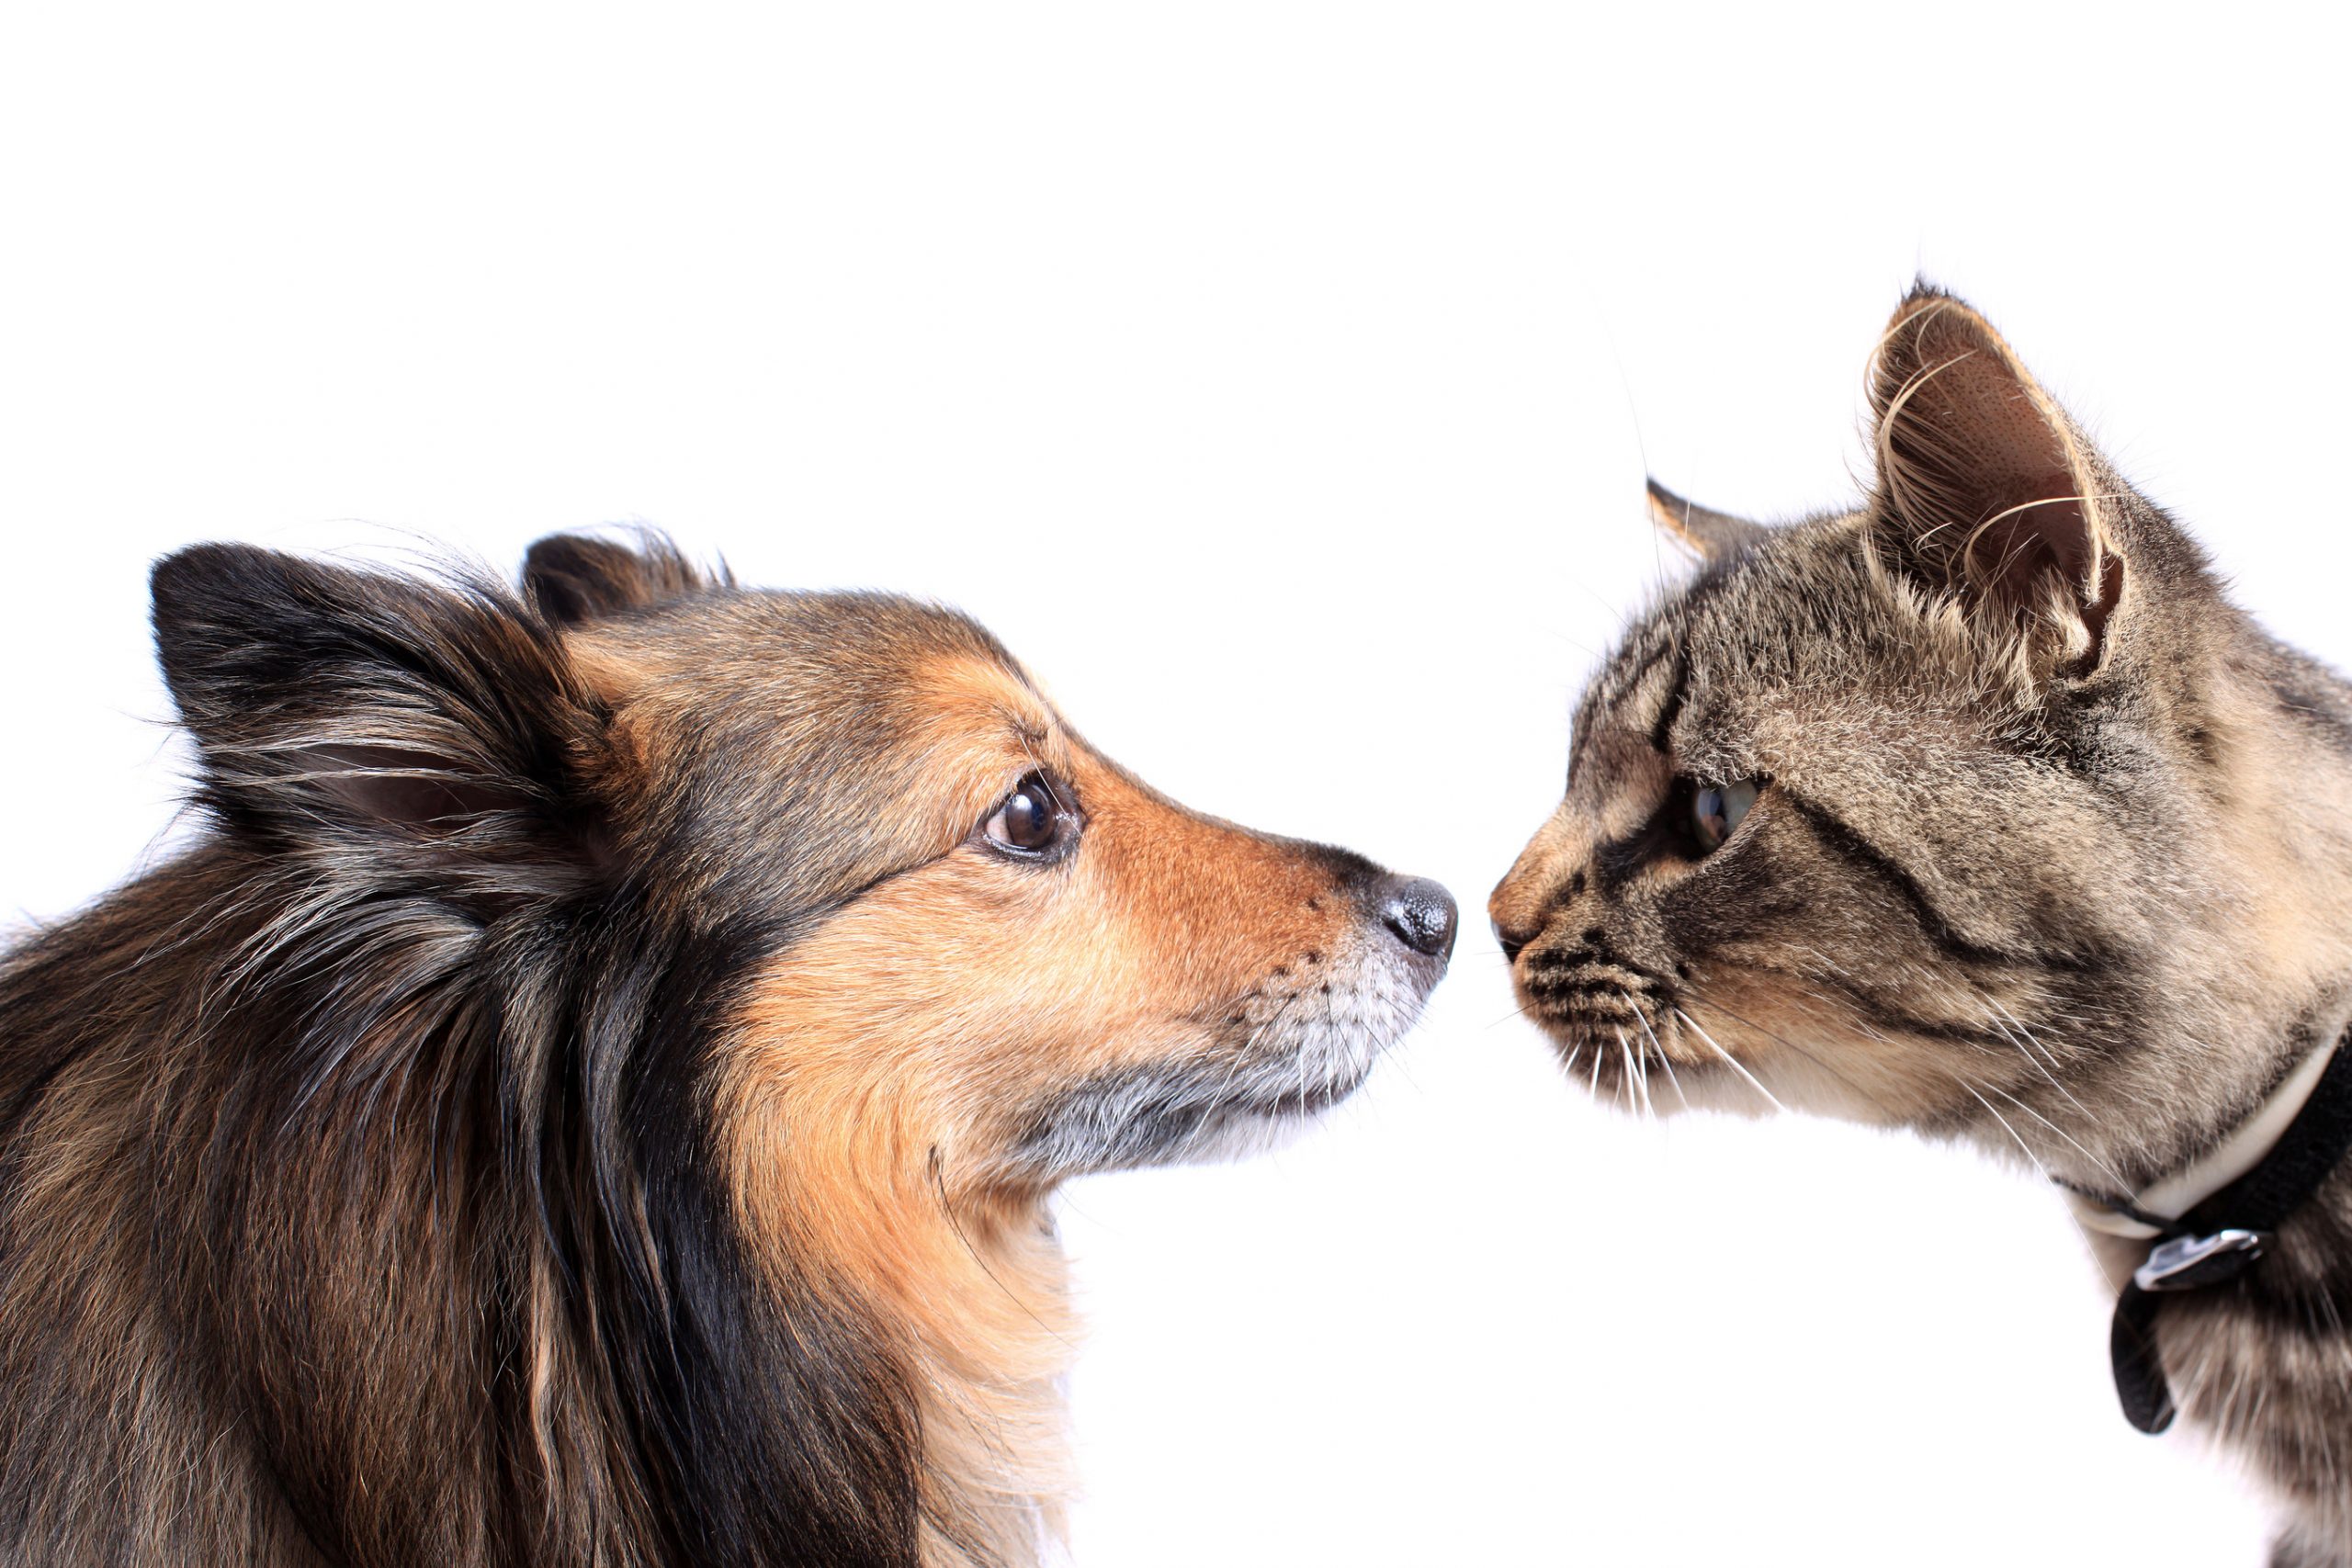 ADM partners with University for better pet food. Photo: Dreamstime